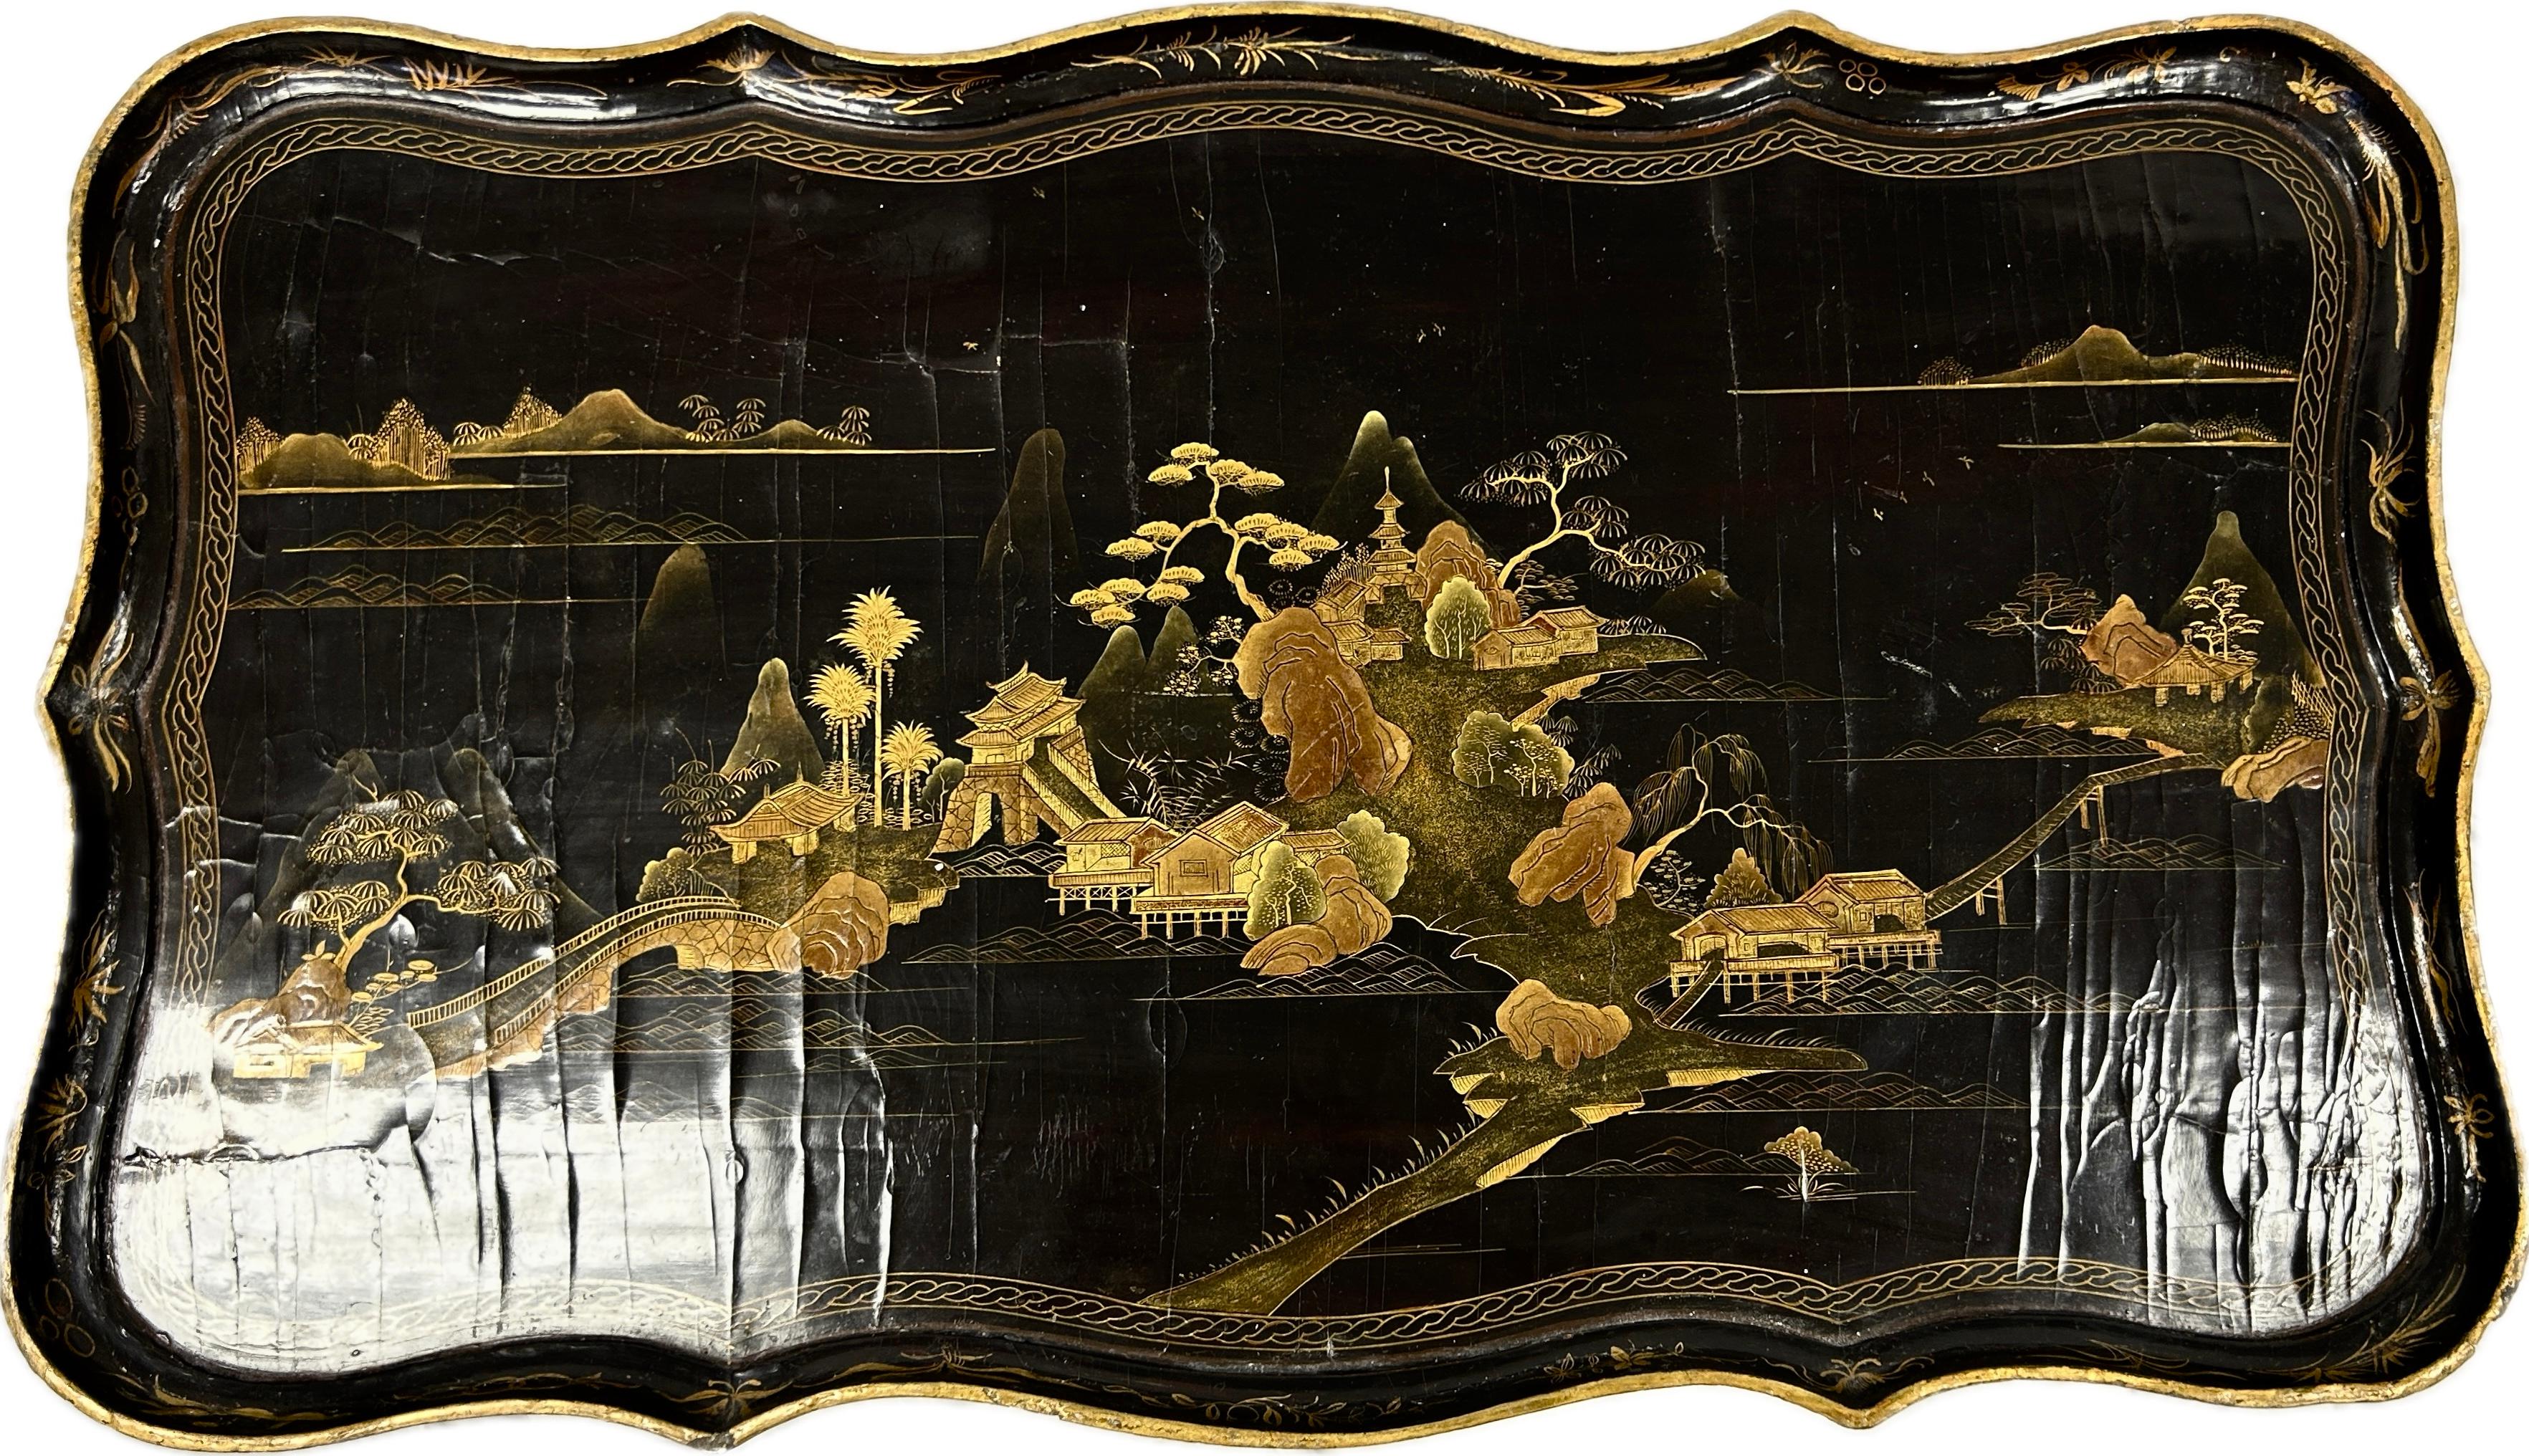 19th Century English Chinoiserie lacquered table. Table has one drawer. Hand-painted Chinese landscape in rich colors of gold, mossy green, and brown on a black background. Curved legs are are black lacquered wood culminating into gold embellished